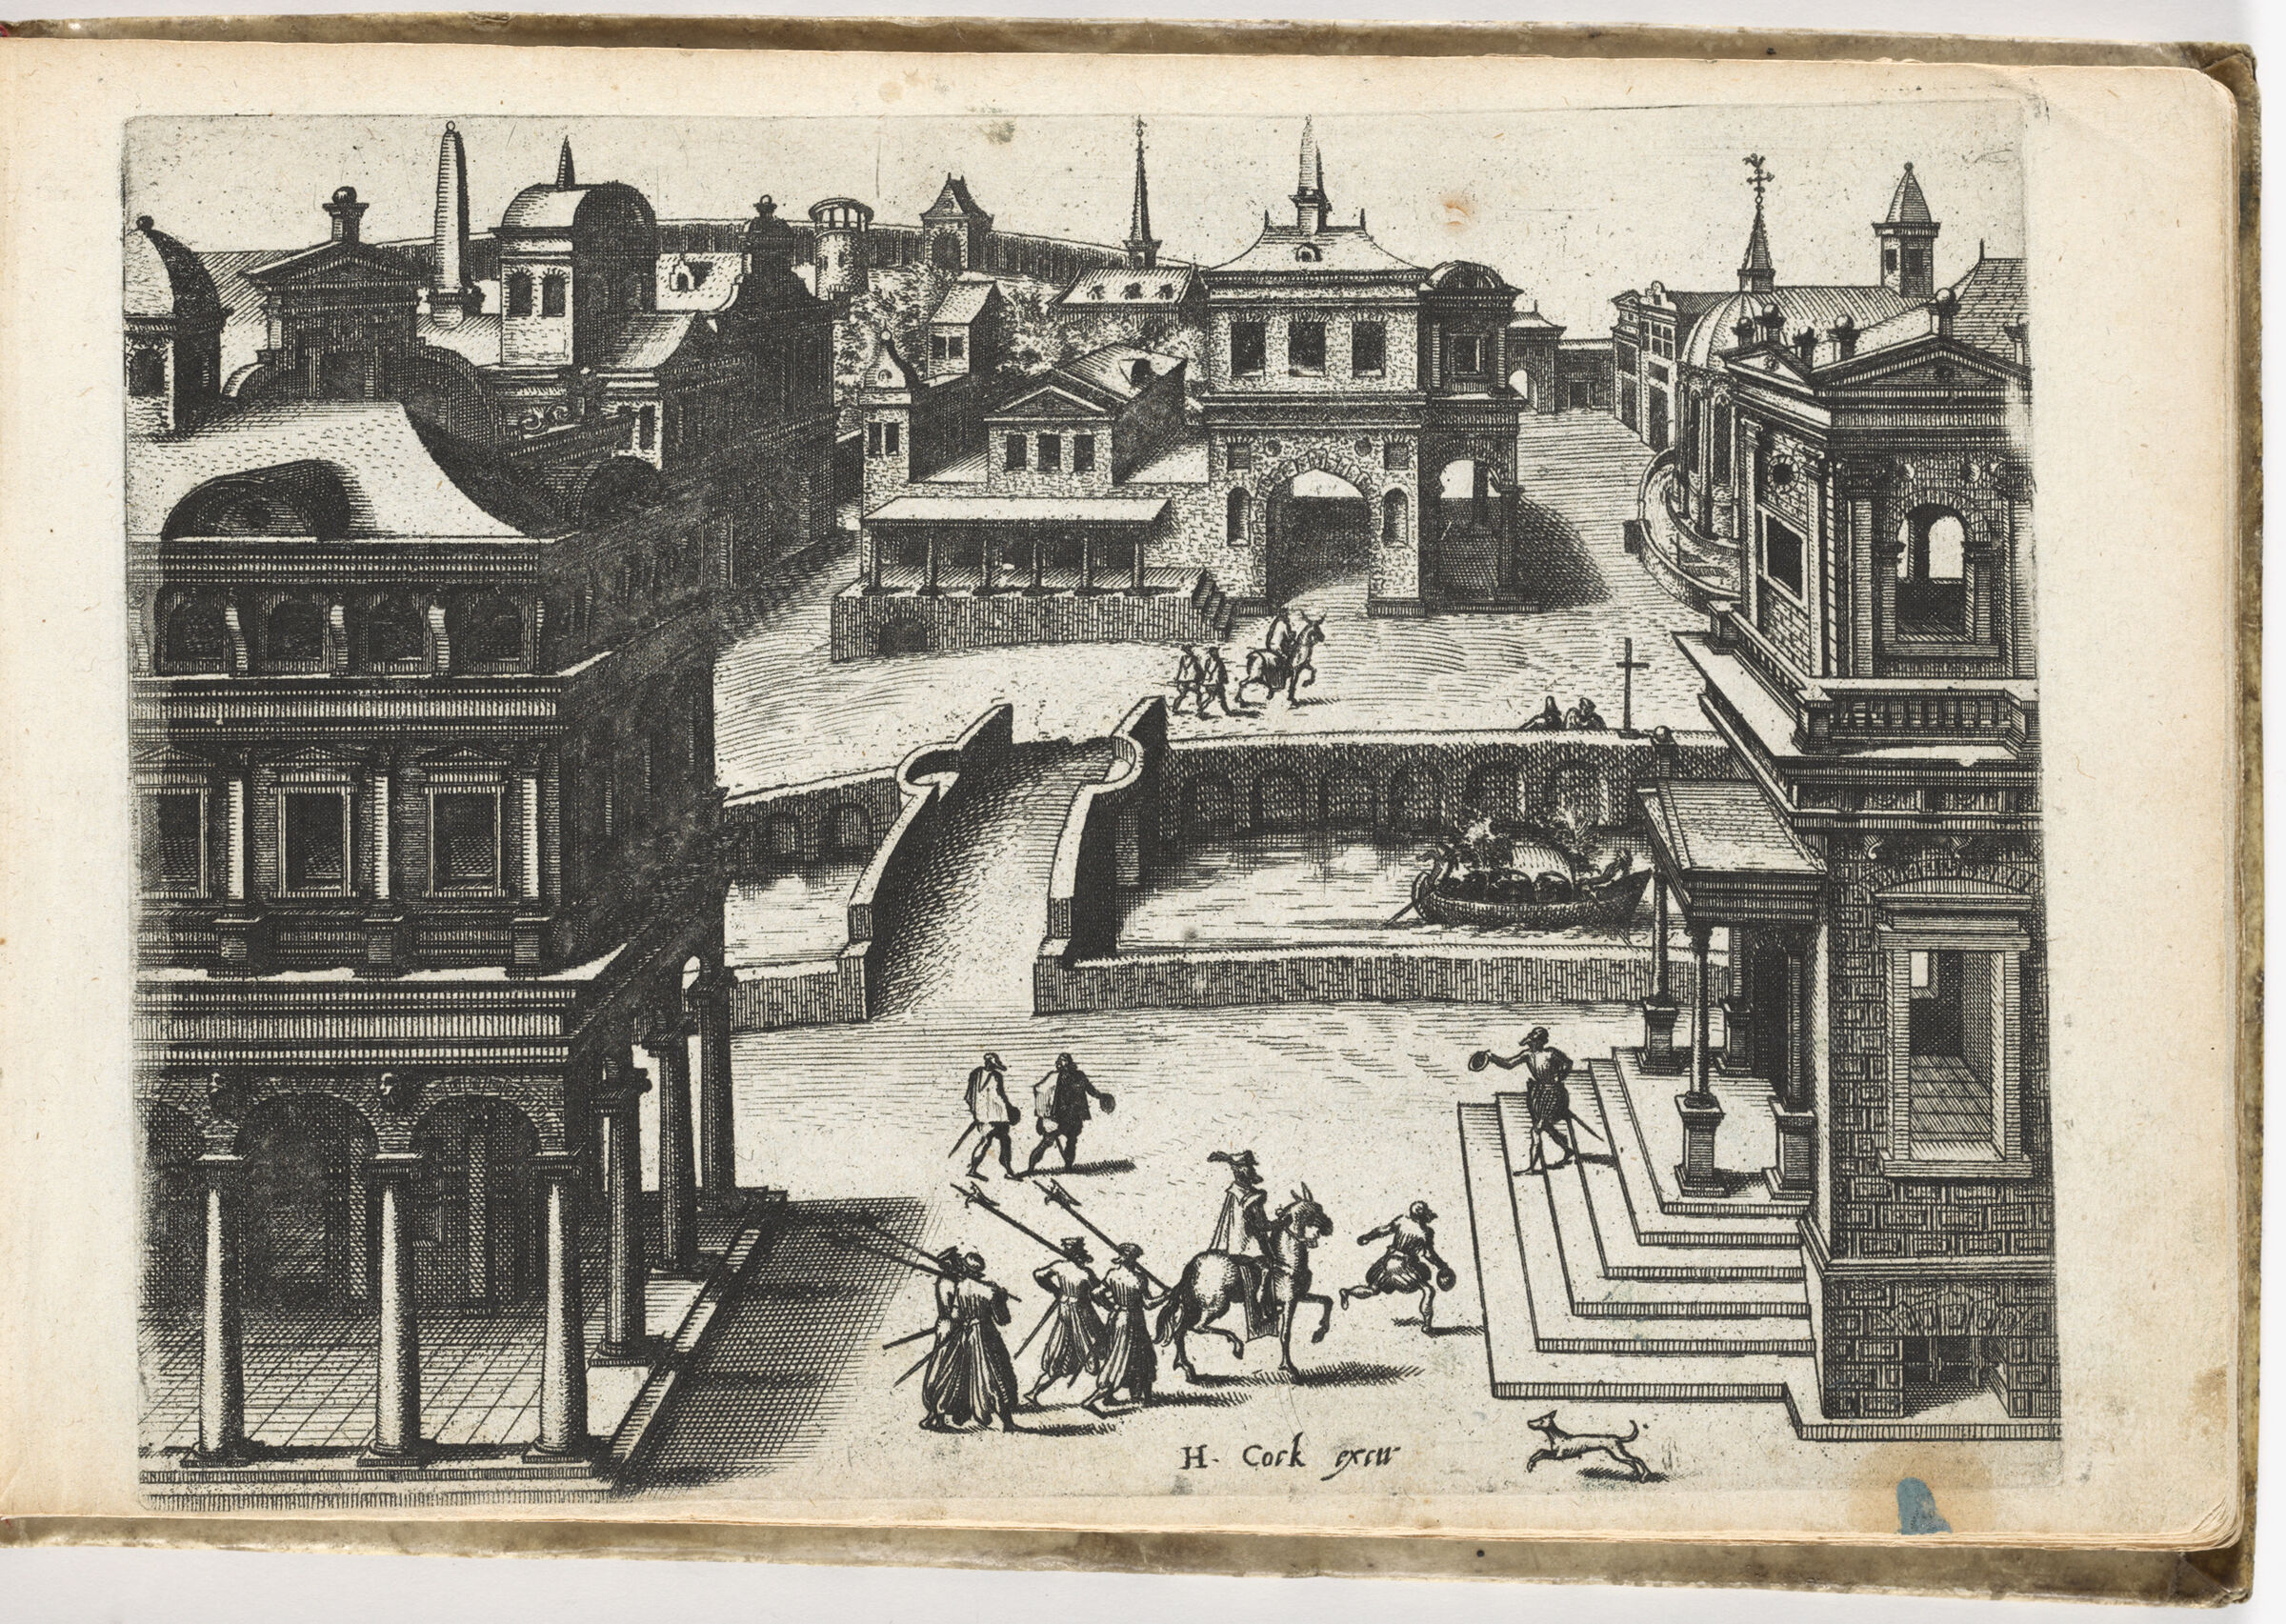 Bird's-Eye View Of A Town With Palaces And A Canal, From The Steps Of A Building In The Right Foreground A Man Is Greeting A Rider On Horseback (N.h.)